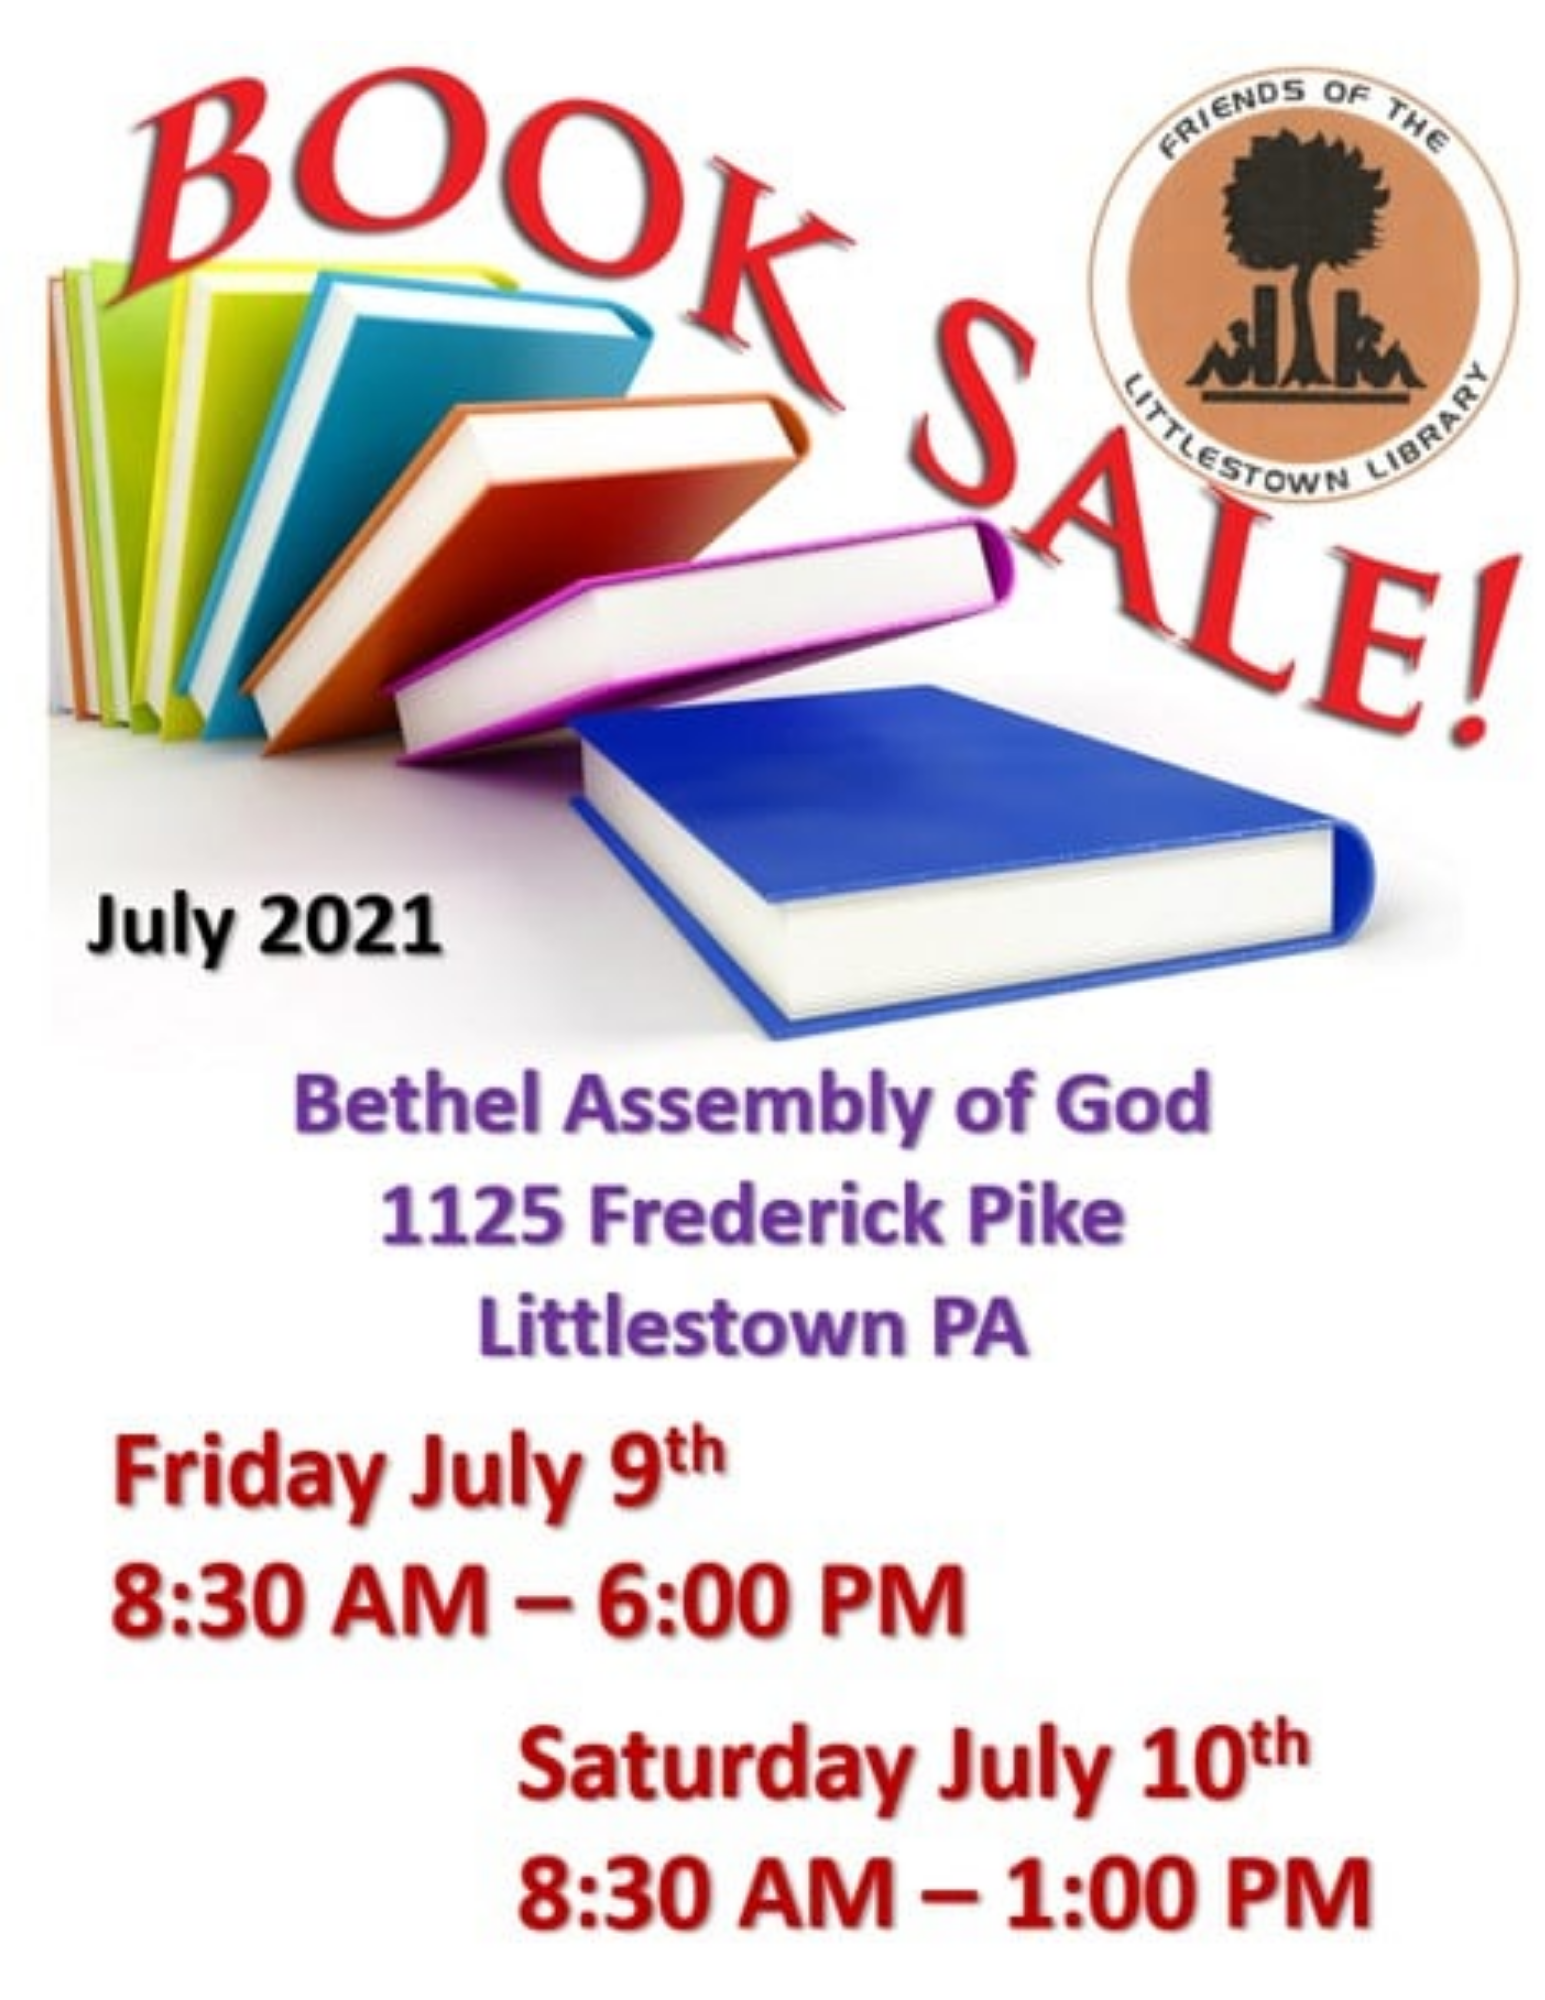 Friends of the Littlestown Library Book Sale July 9-10, 2021.